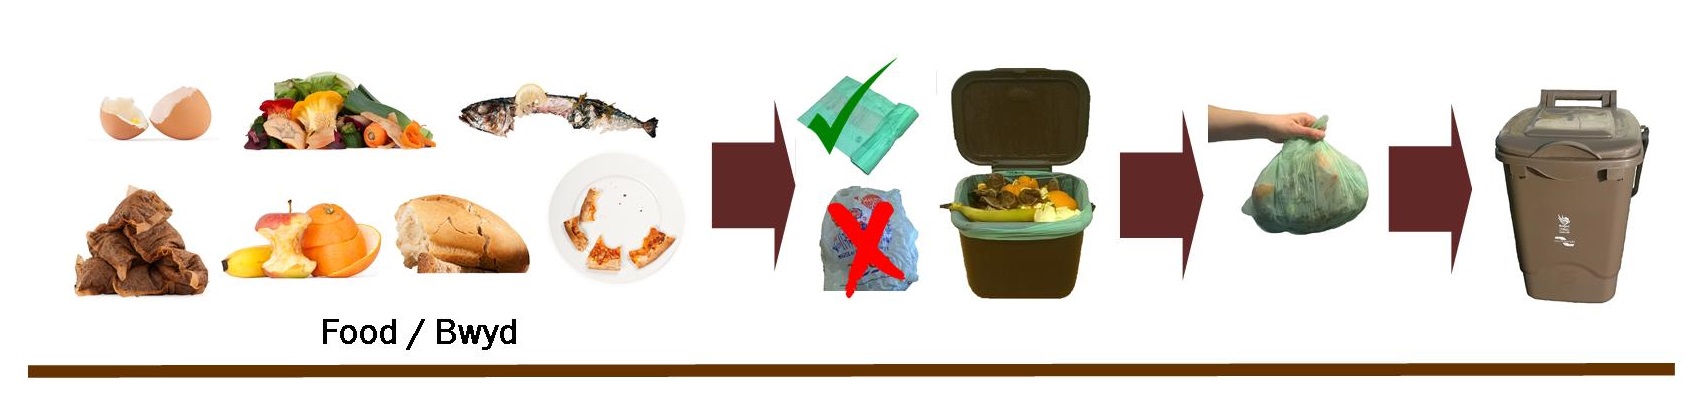 Food box graphic for web